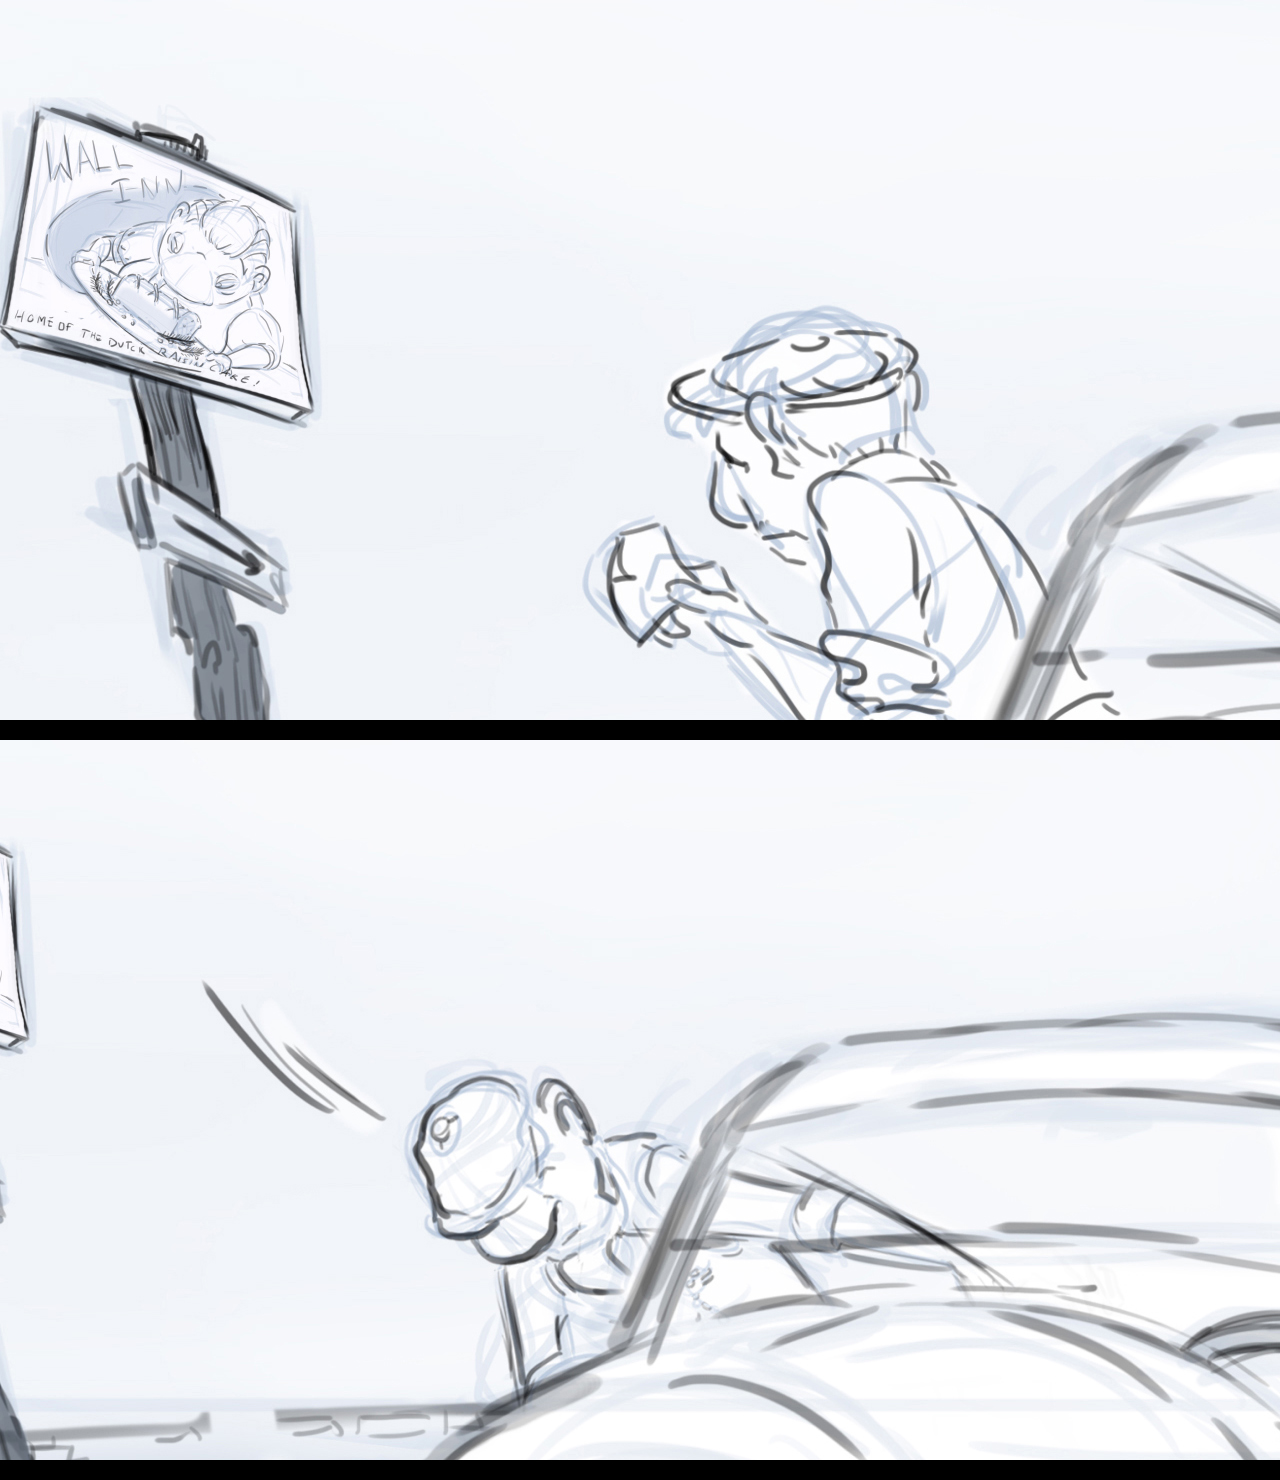 Storyboard sequence from an animated film. Sequence shows man looking away from poster and towards note. He then gets in the car.